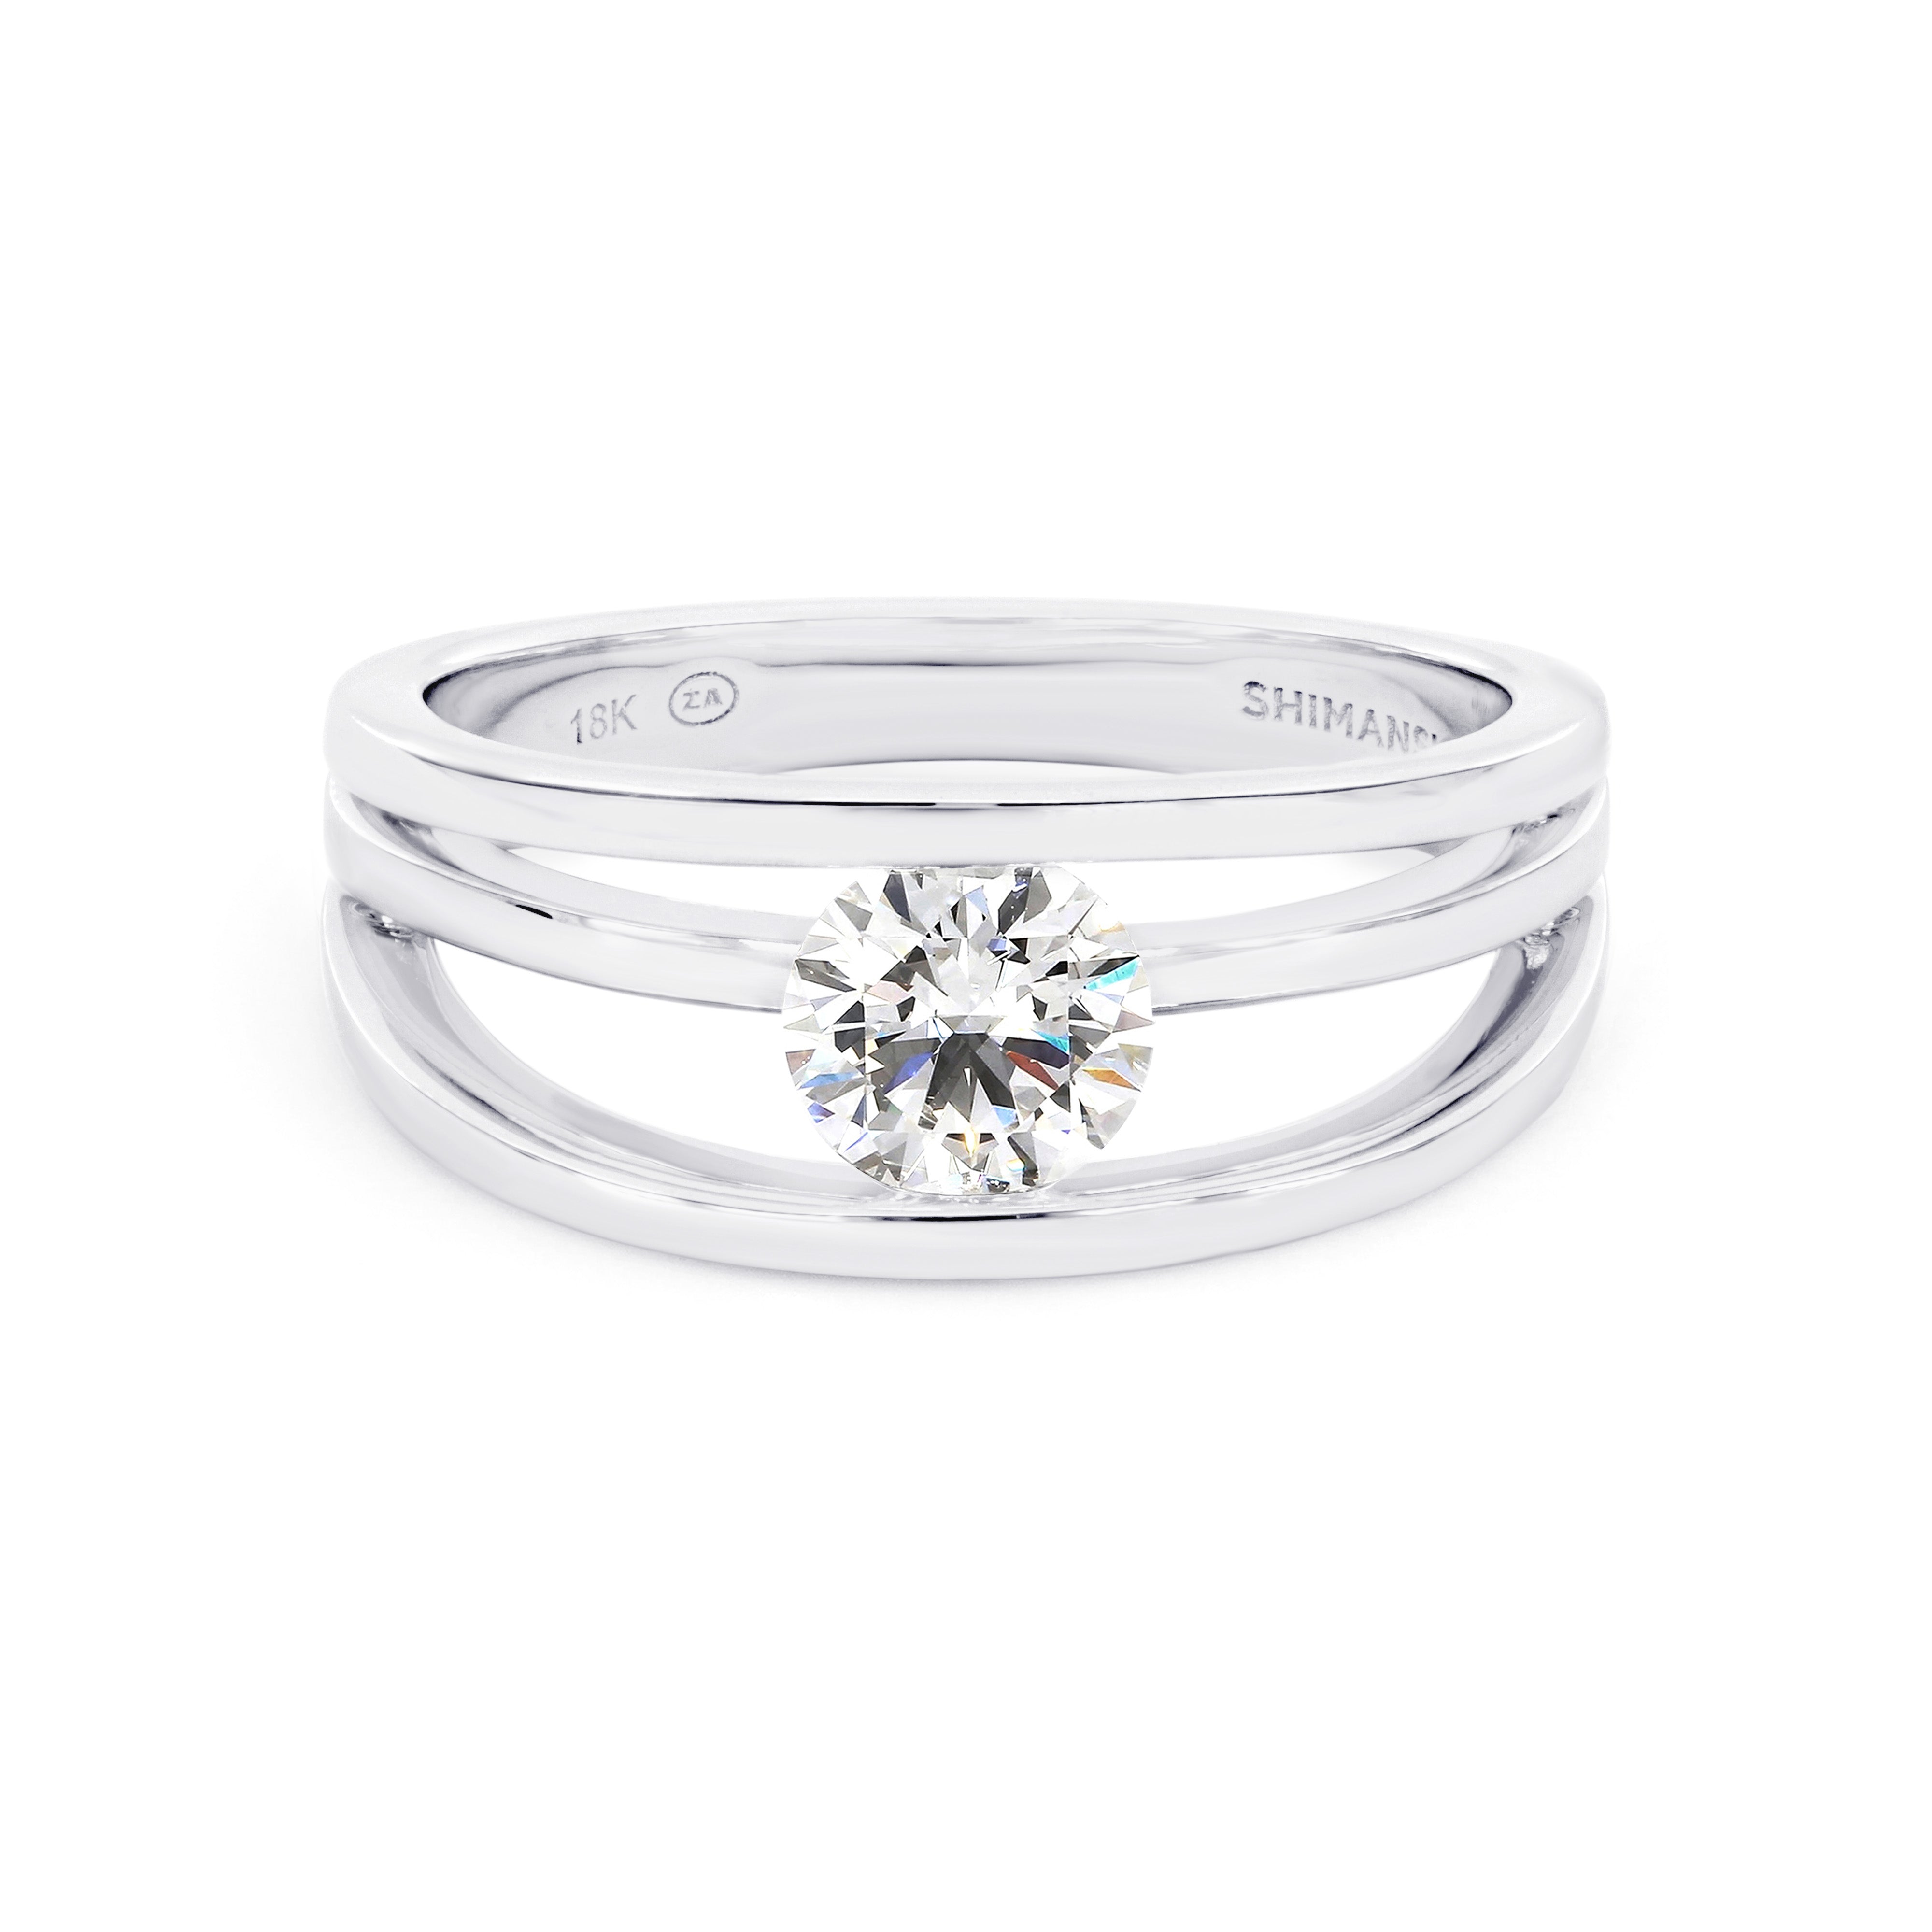 Evolym Diamond Engagement Ring 0.70 Carat in 18K White Gold Front View